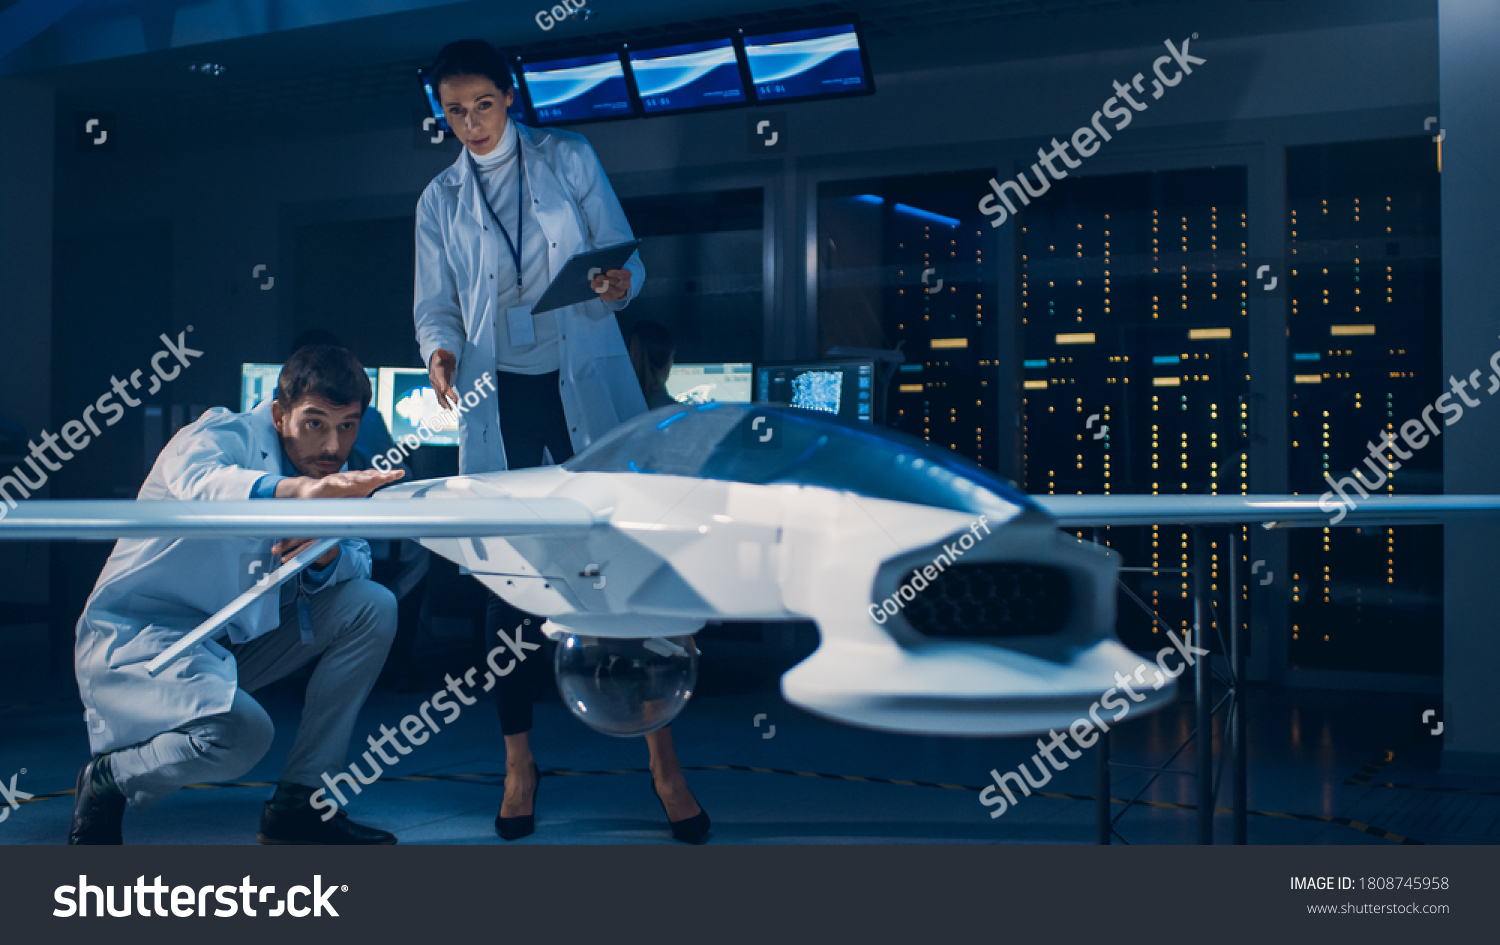 Meeting of Aerospace Engineers Working On Unmanned Aerial Vehicle / Drone Prototype. Aviation Scientists in White Coats Talking. Commercial Aerial Surveillance Aircraft in Industrial Laboratory #1808745958